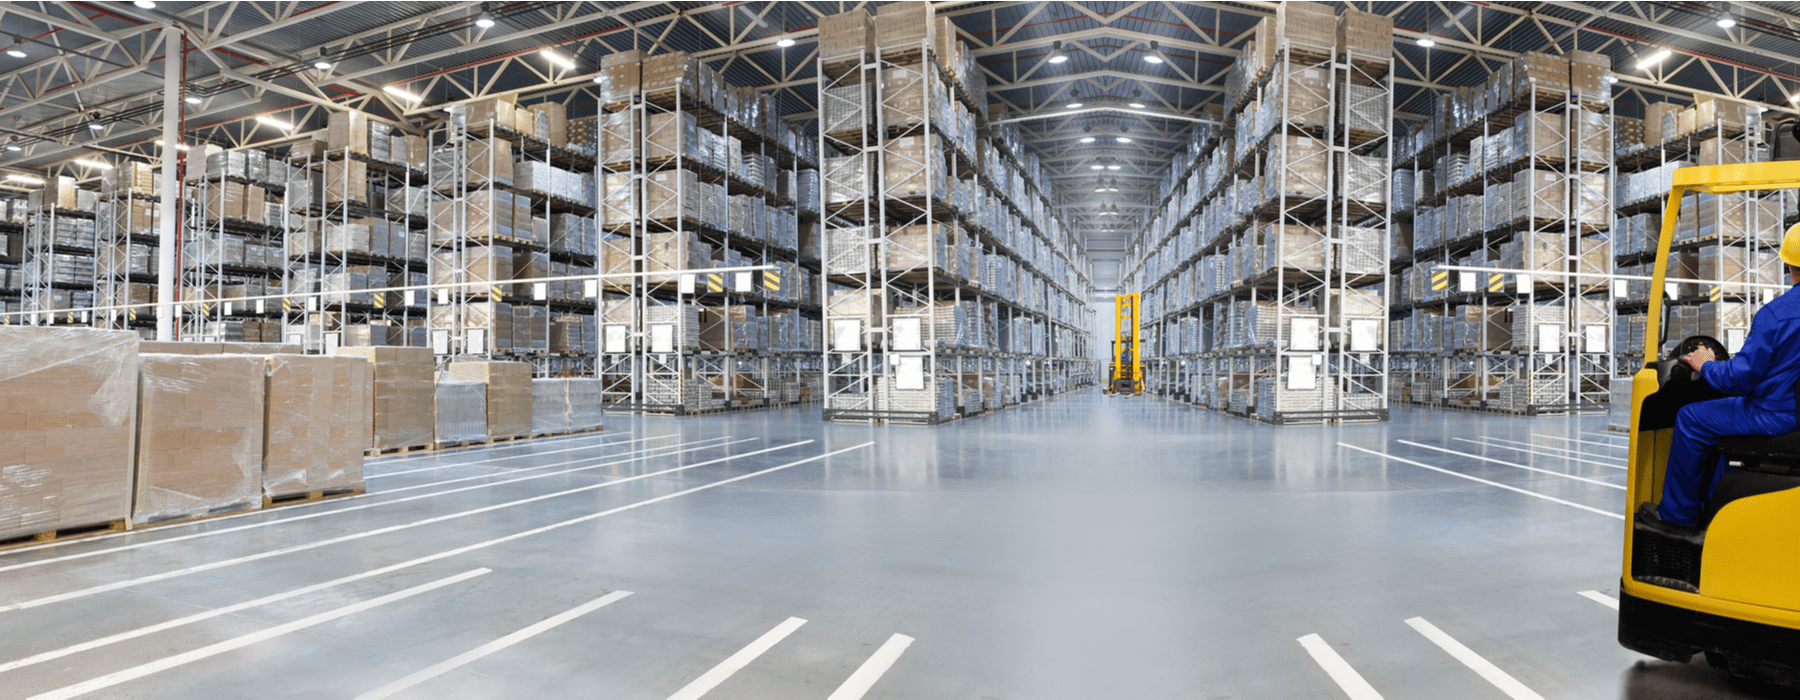 3 Reasons Why Retailers Will Need Urban Fulfillment Centers